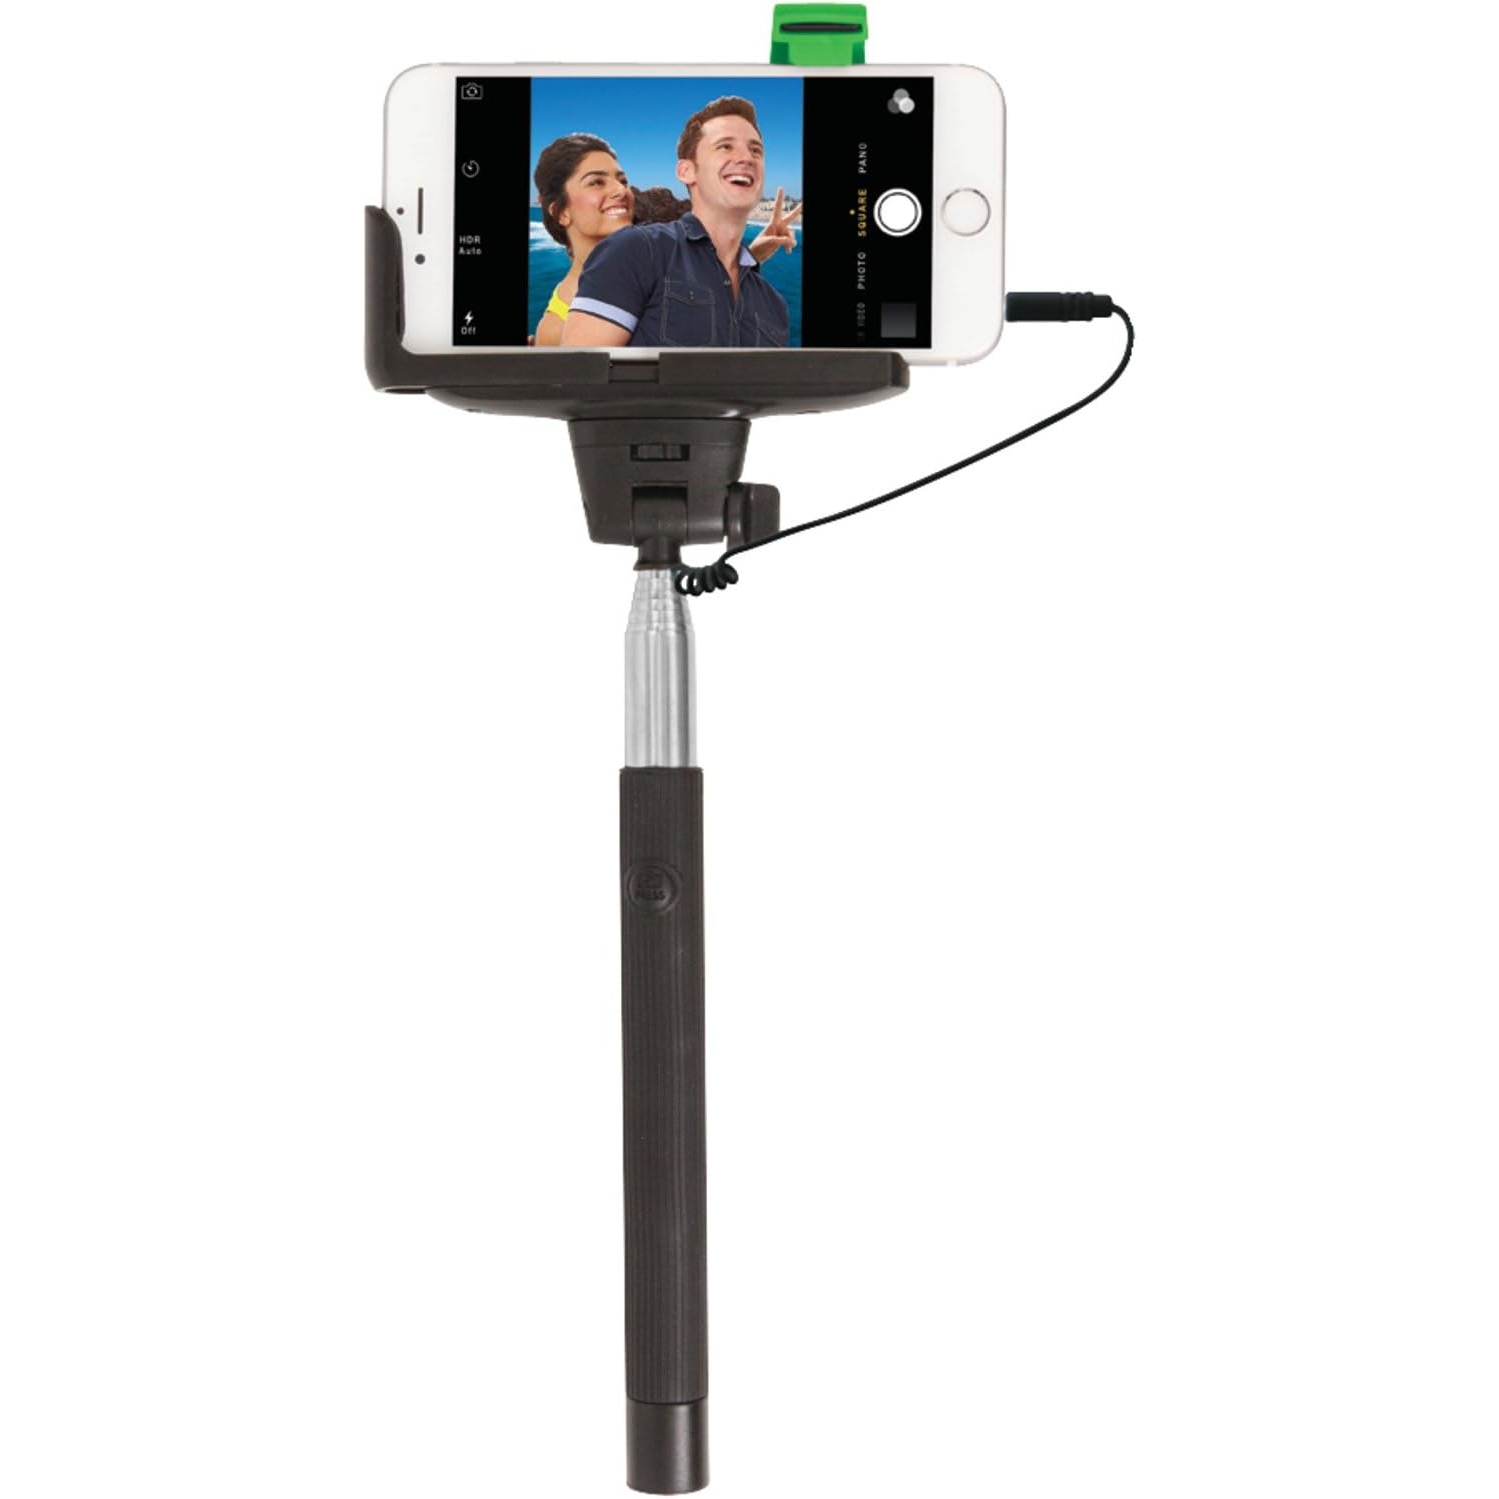 Selfie Stick with Wired Shutter for iPhone 4/5/5s/6/6s & Samsung Galaxy S III/4 - Black